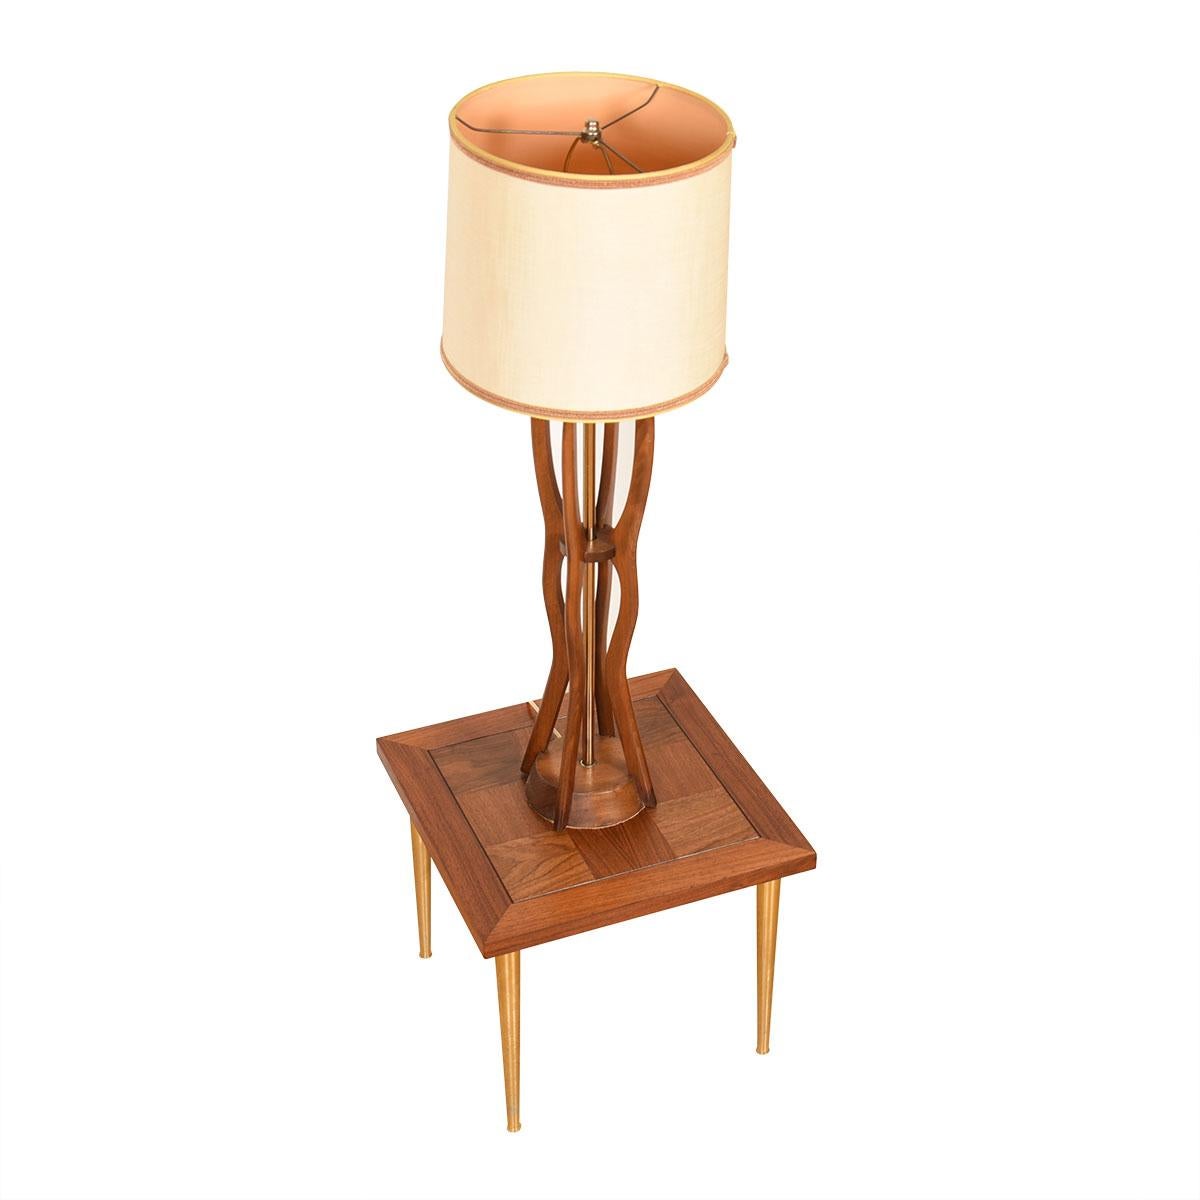 Sculptural MCM Table Lamp in Walnut In Good Condition For Sale In Kensington, MD